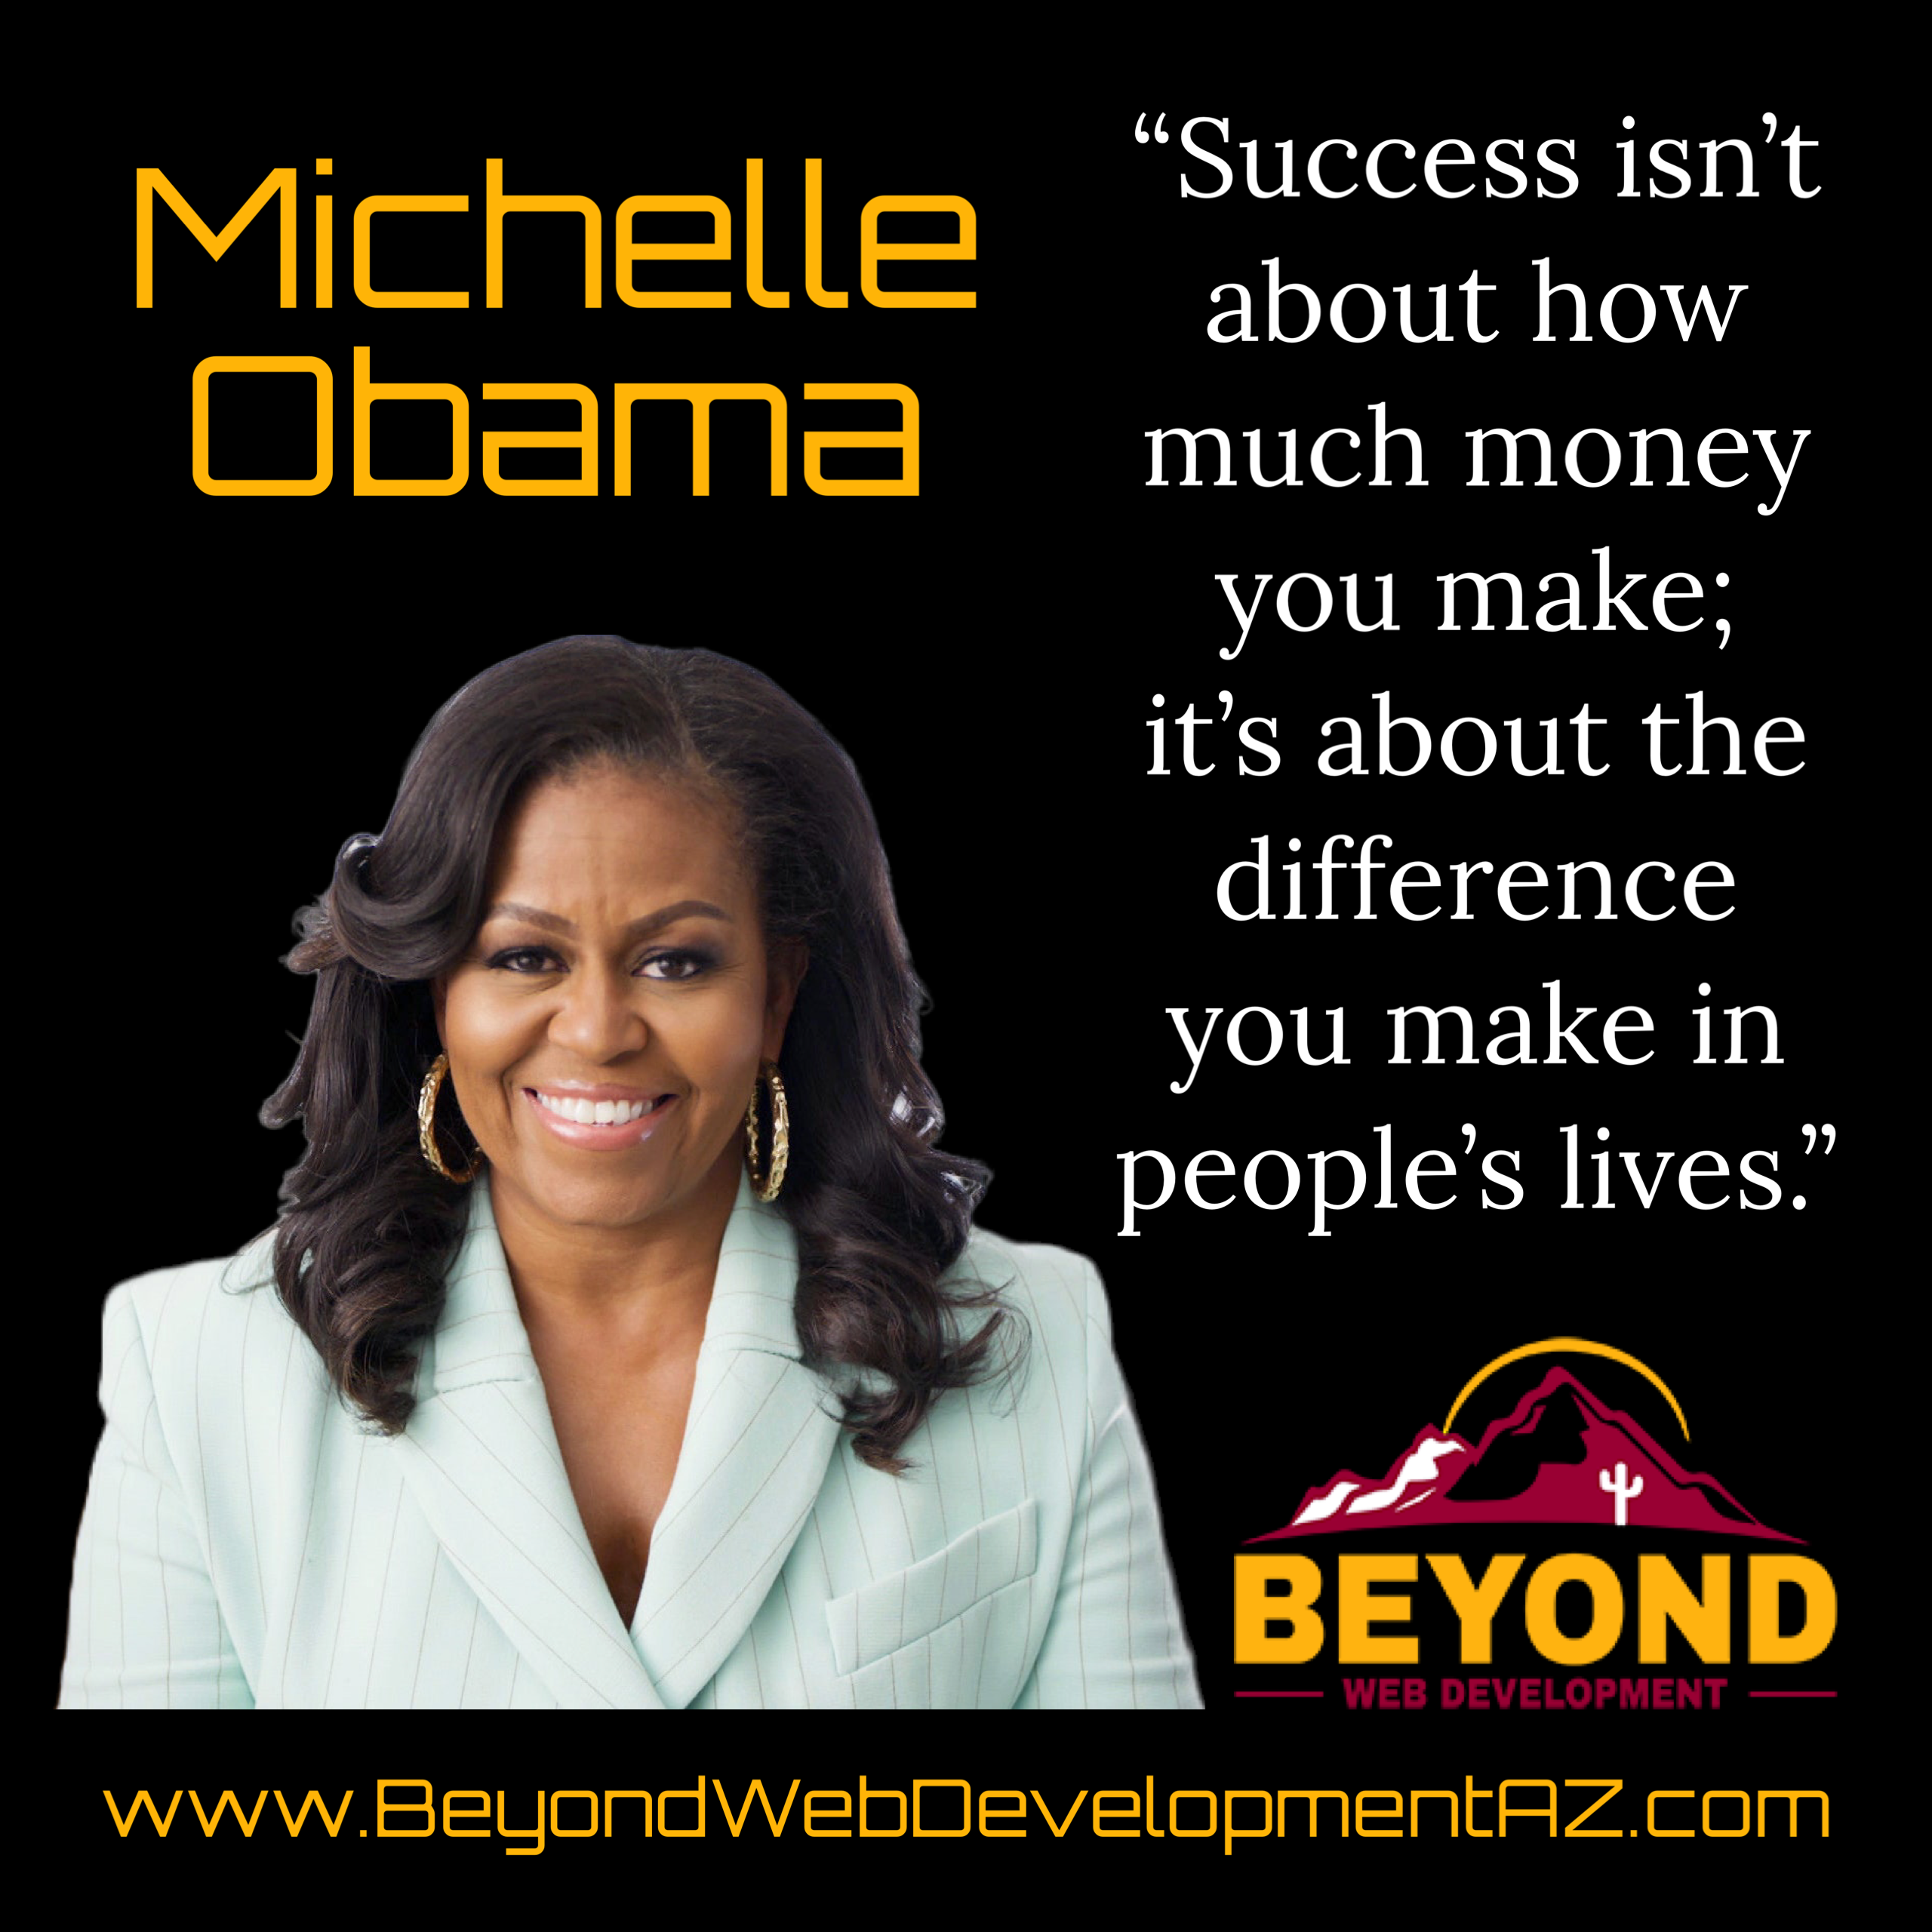 How Michelle see’s Success